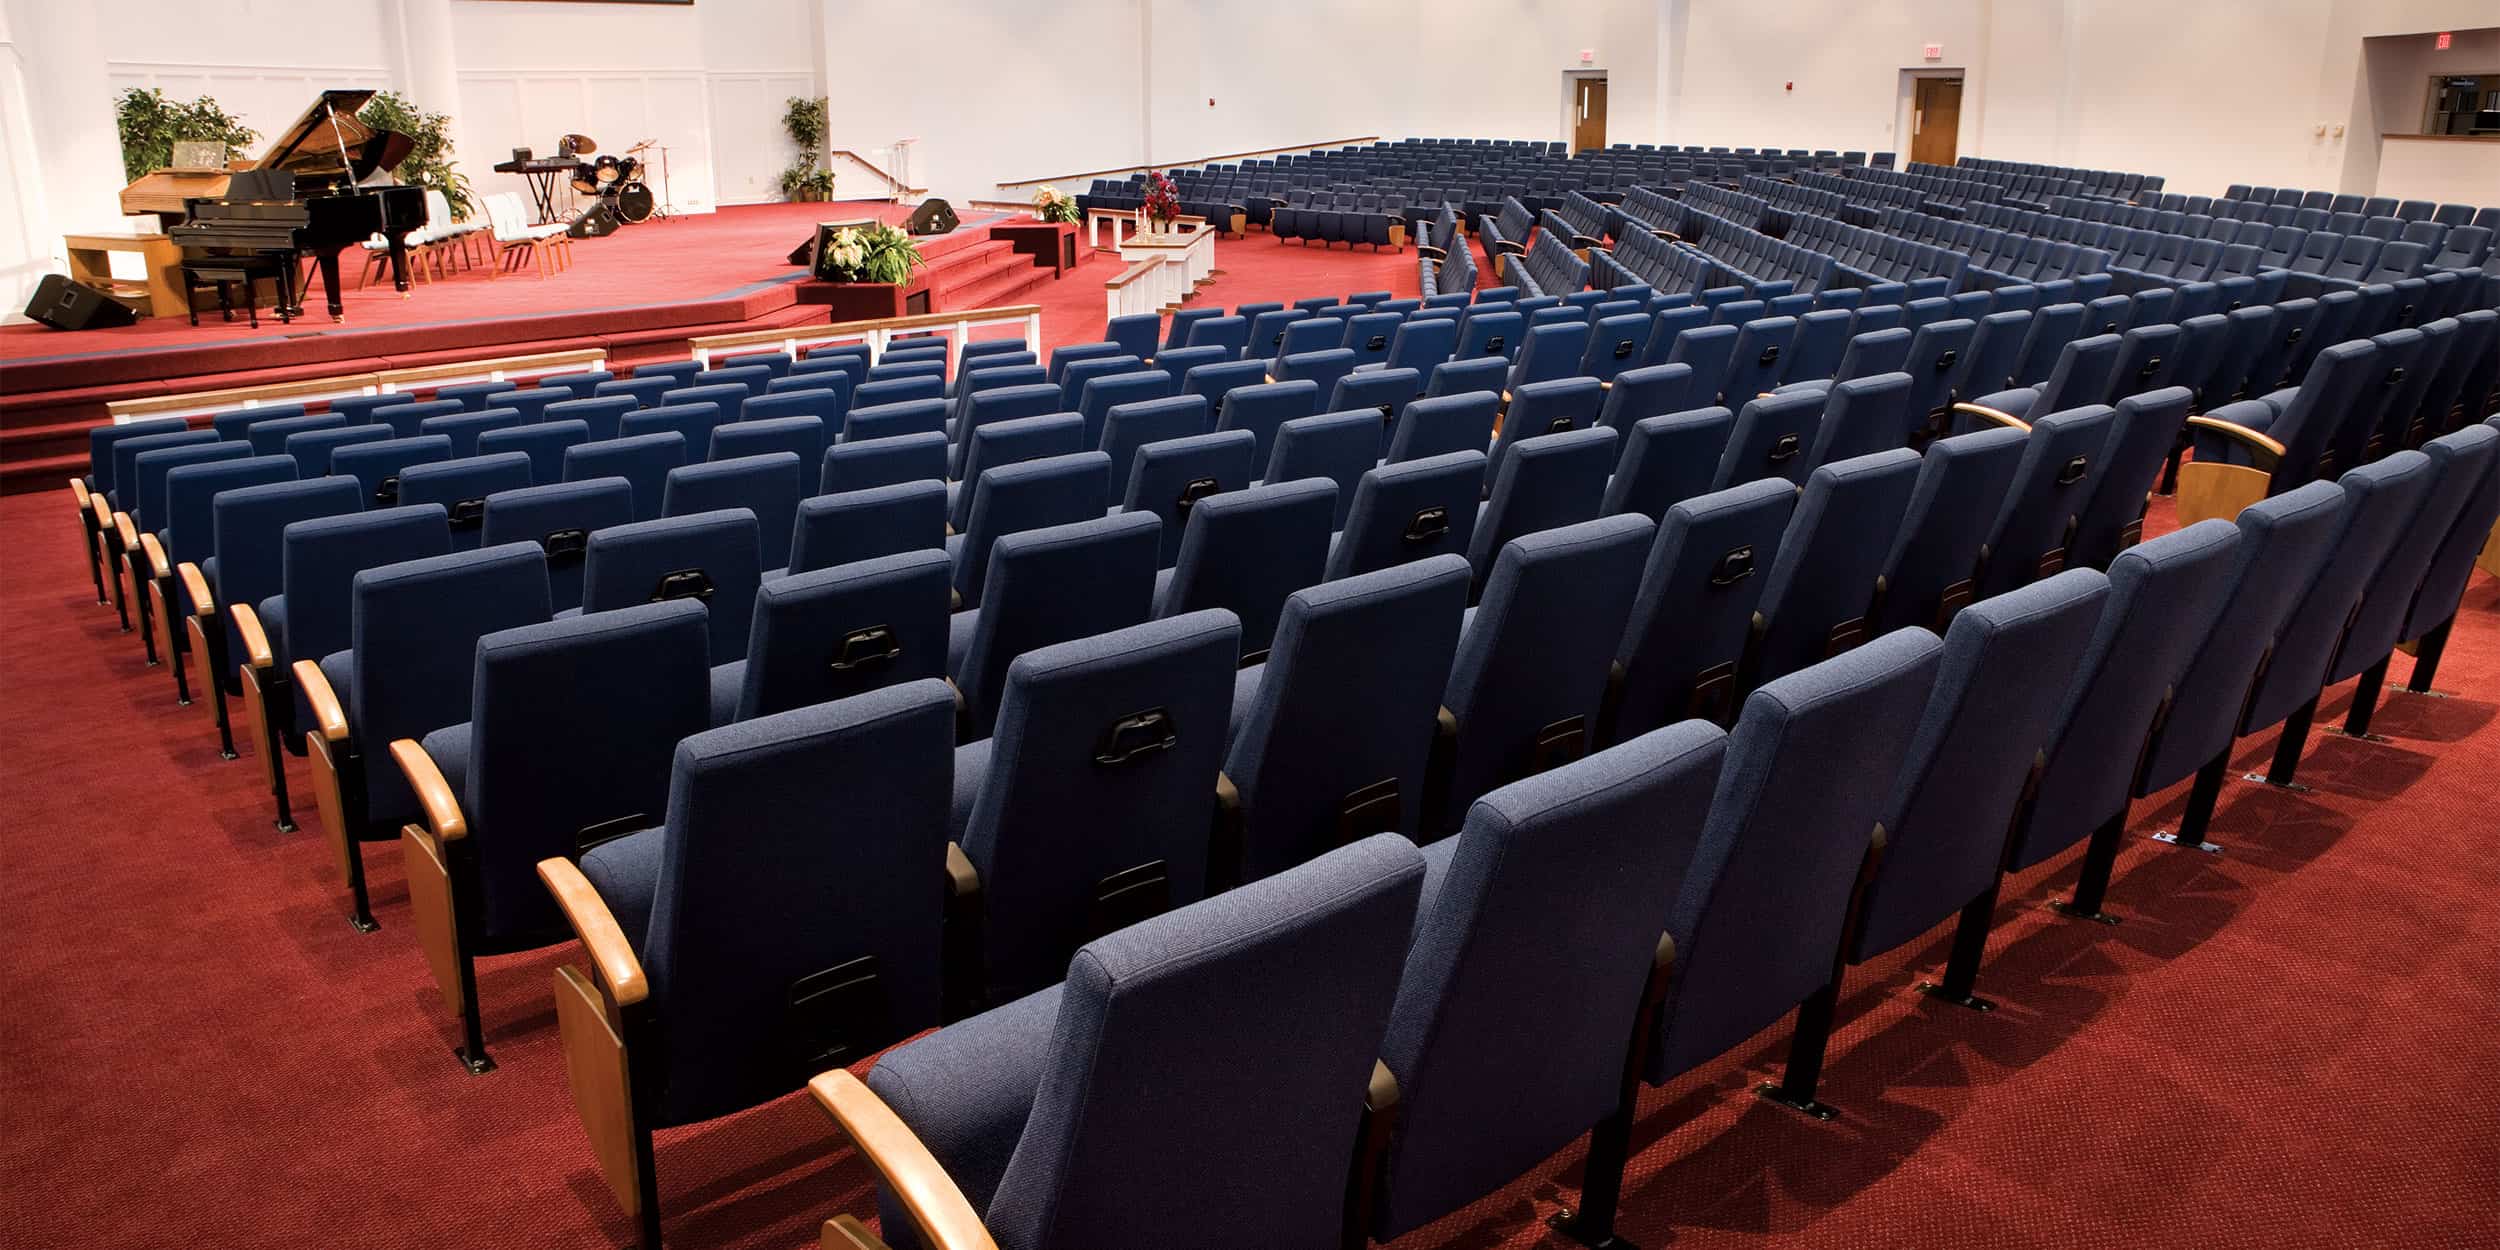 View of auditorium seats from back of church